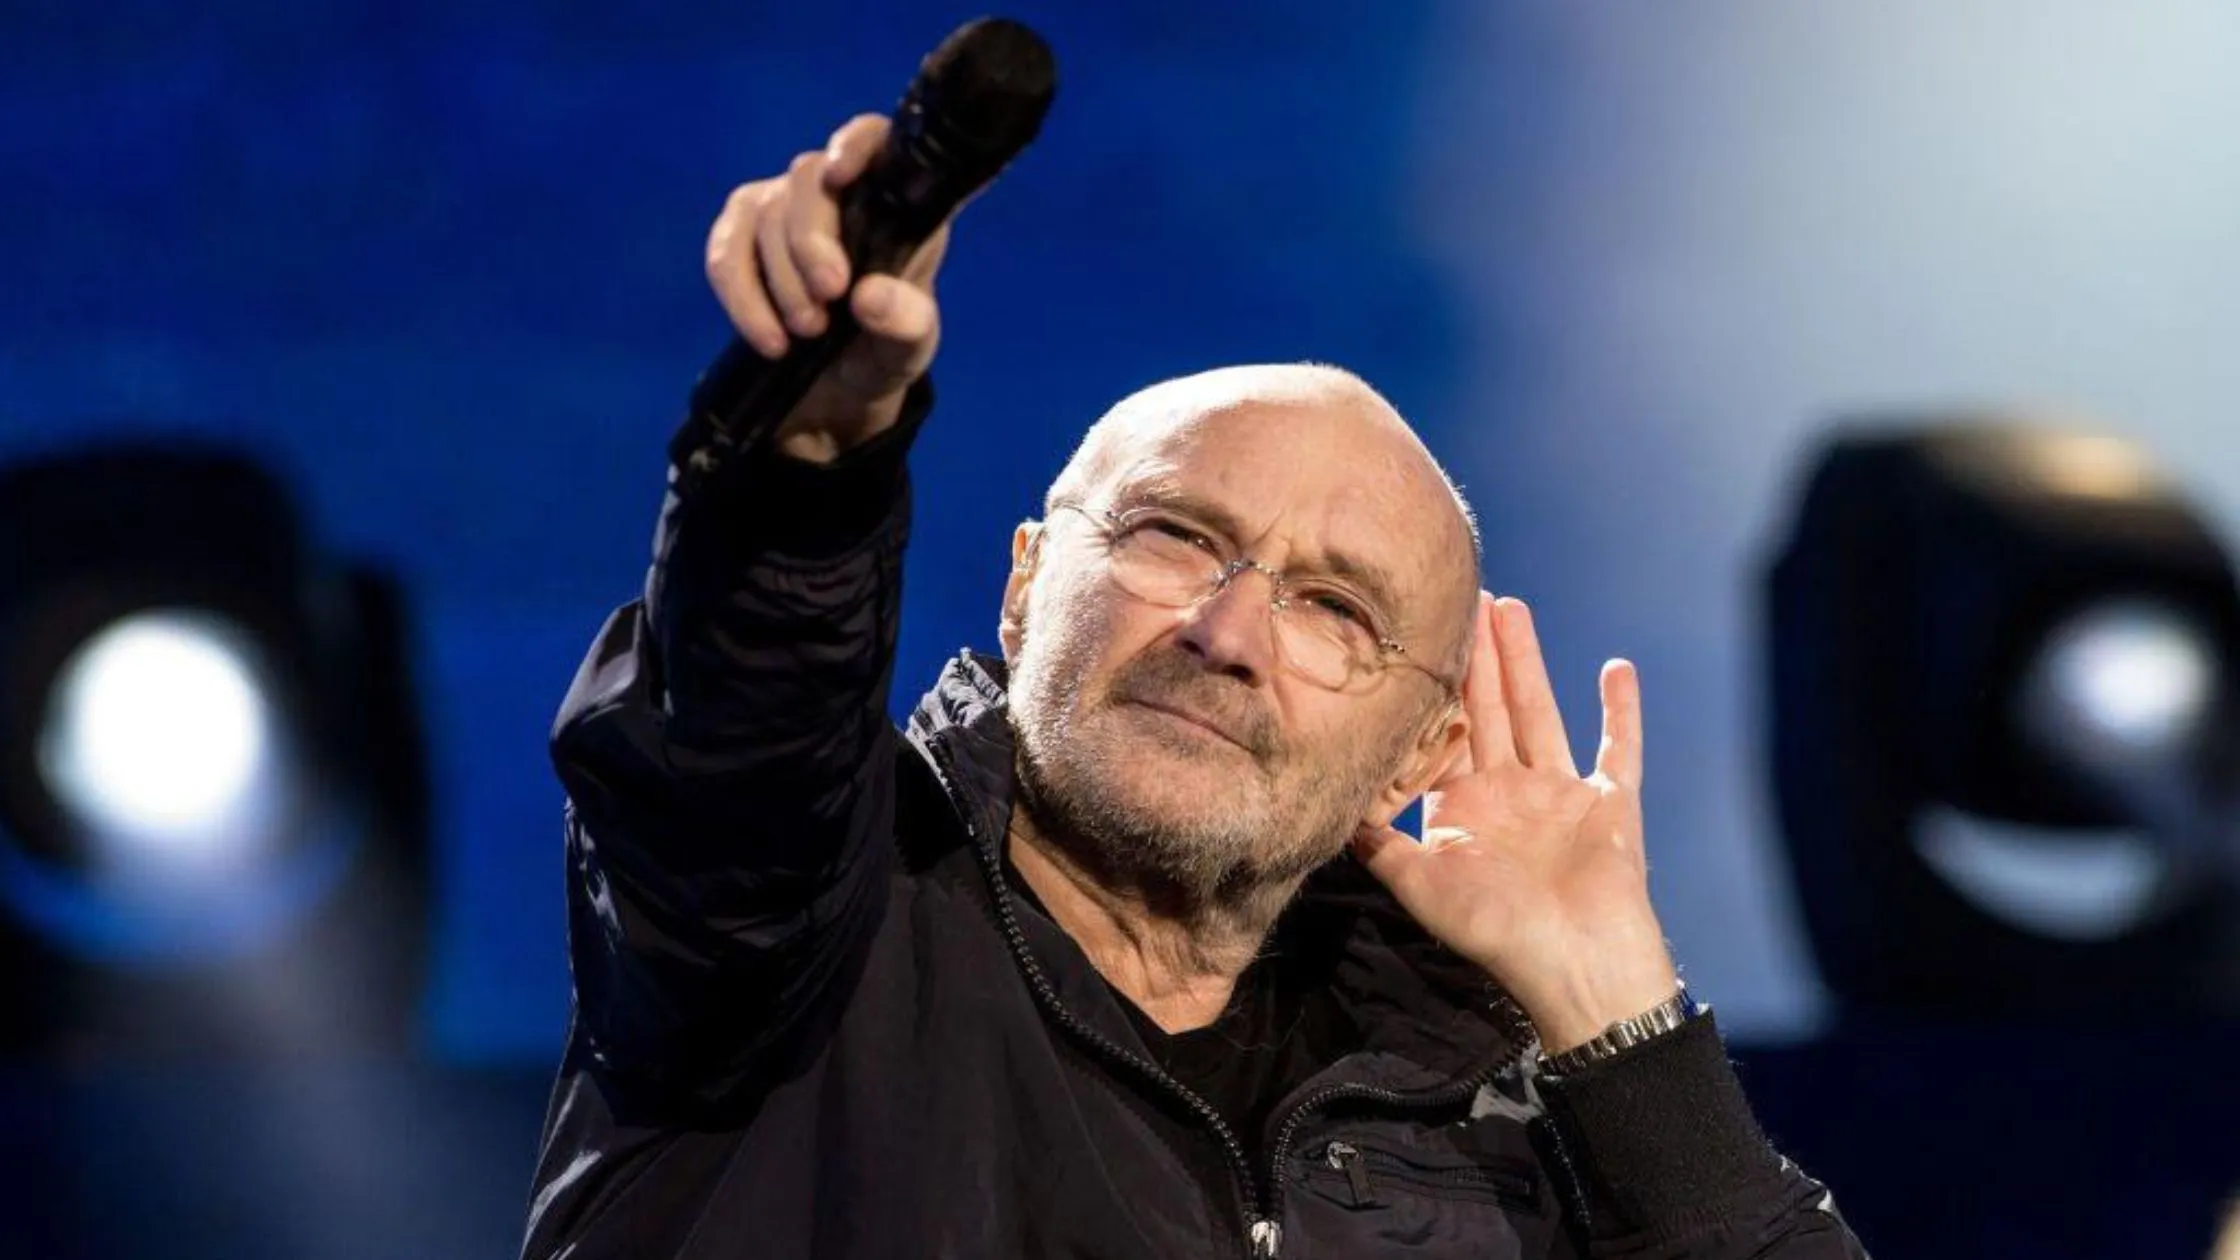 How has Phil Collins’ health affected his career, & what recent projects has he undertaken?